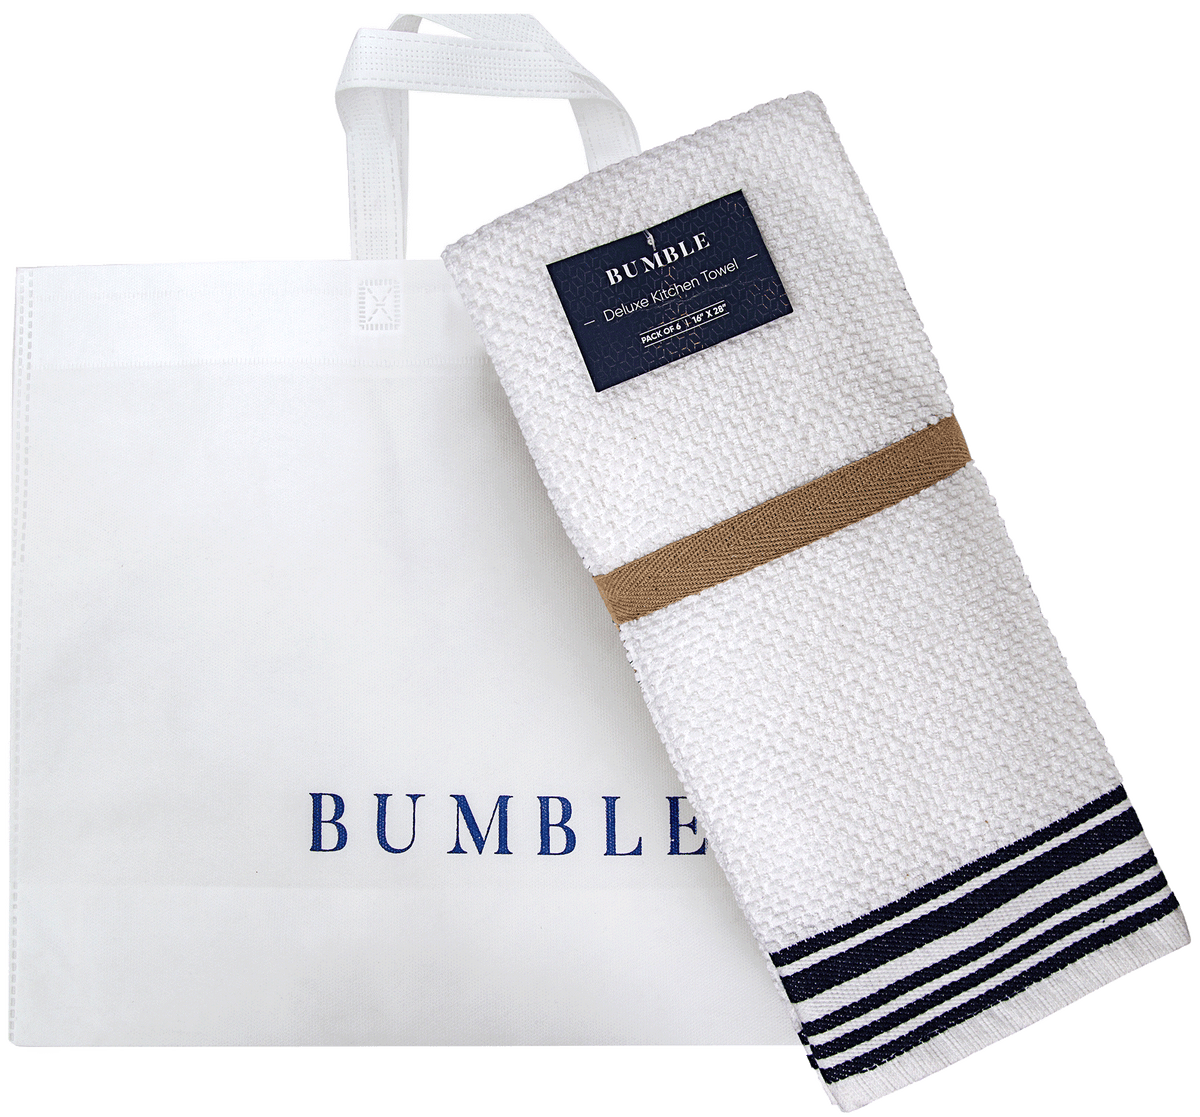 Weft Insert Kitchen Towels - Best Quality in Cheap Price – Bumble Towels